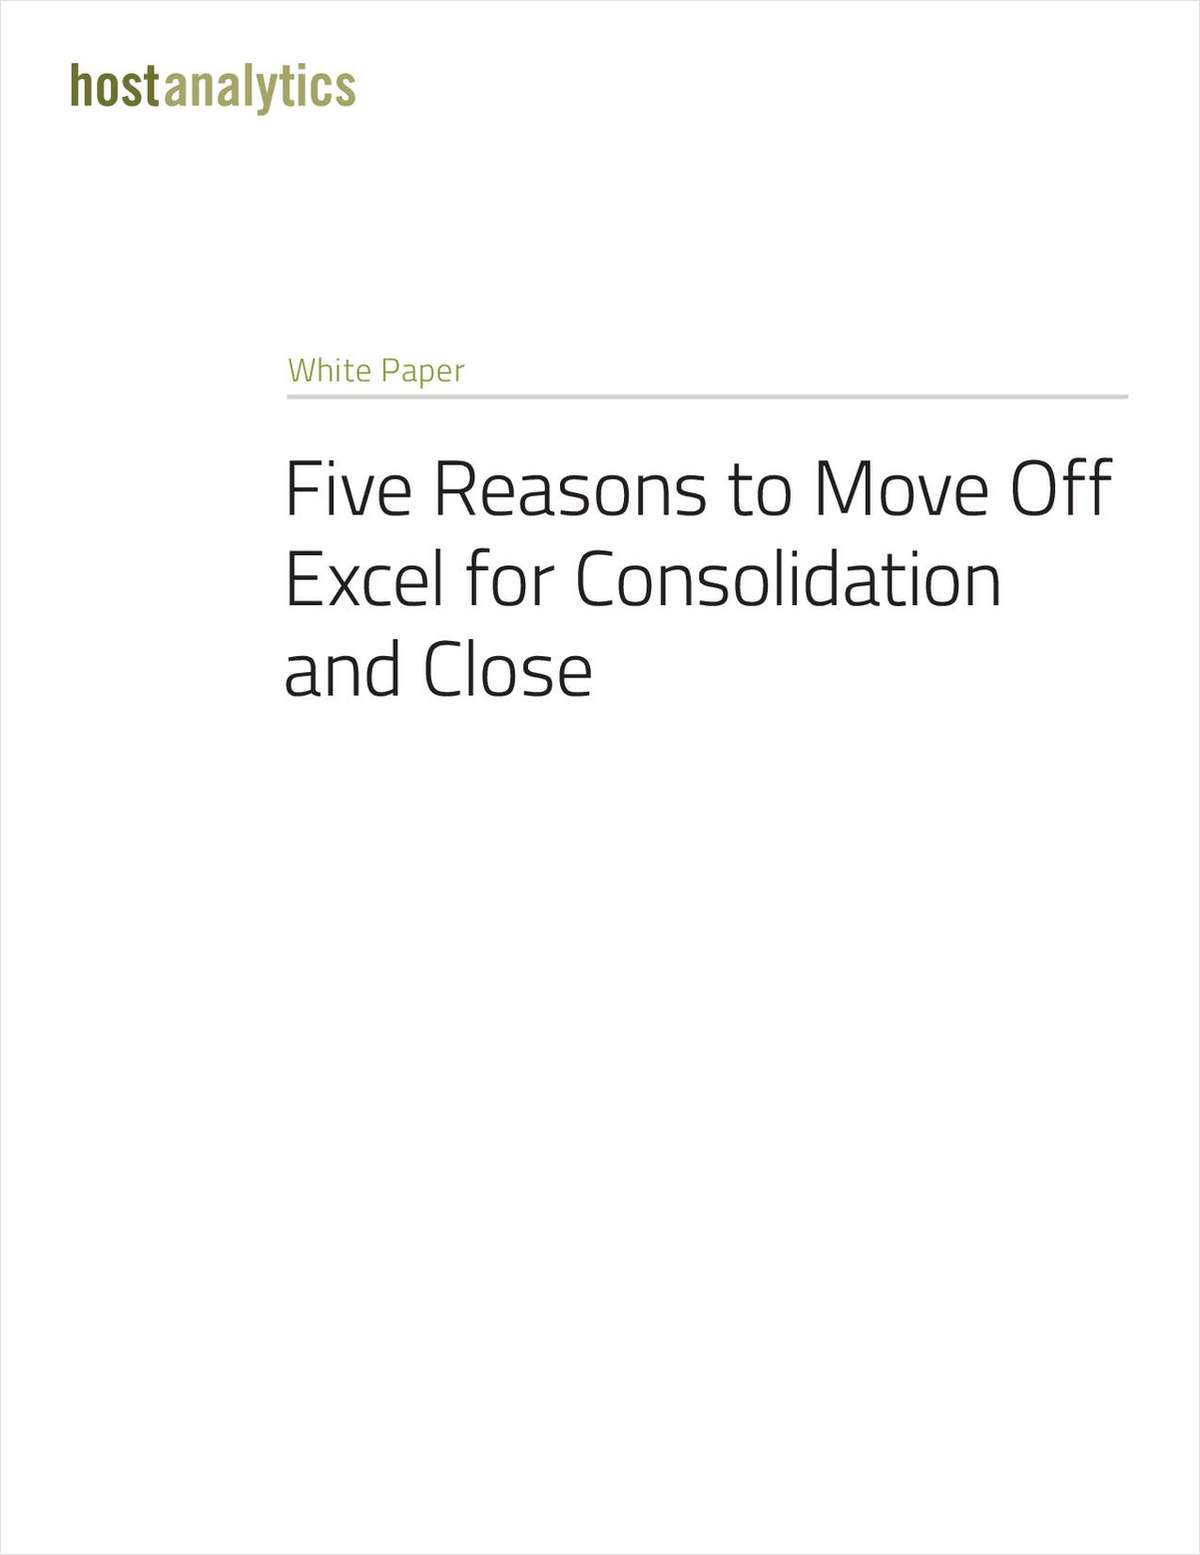 Five Reasons for Moving Off Excel for Consolidation and Close